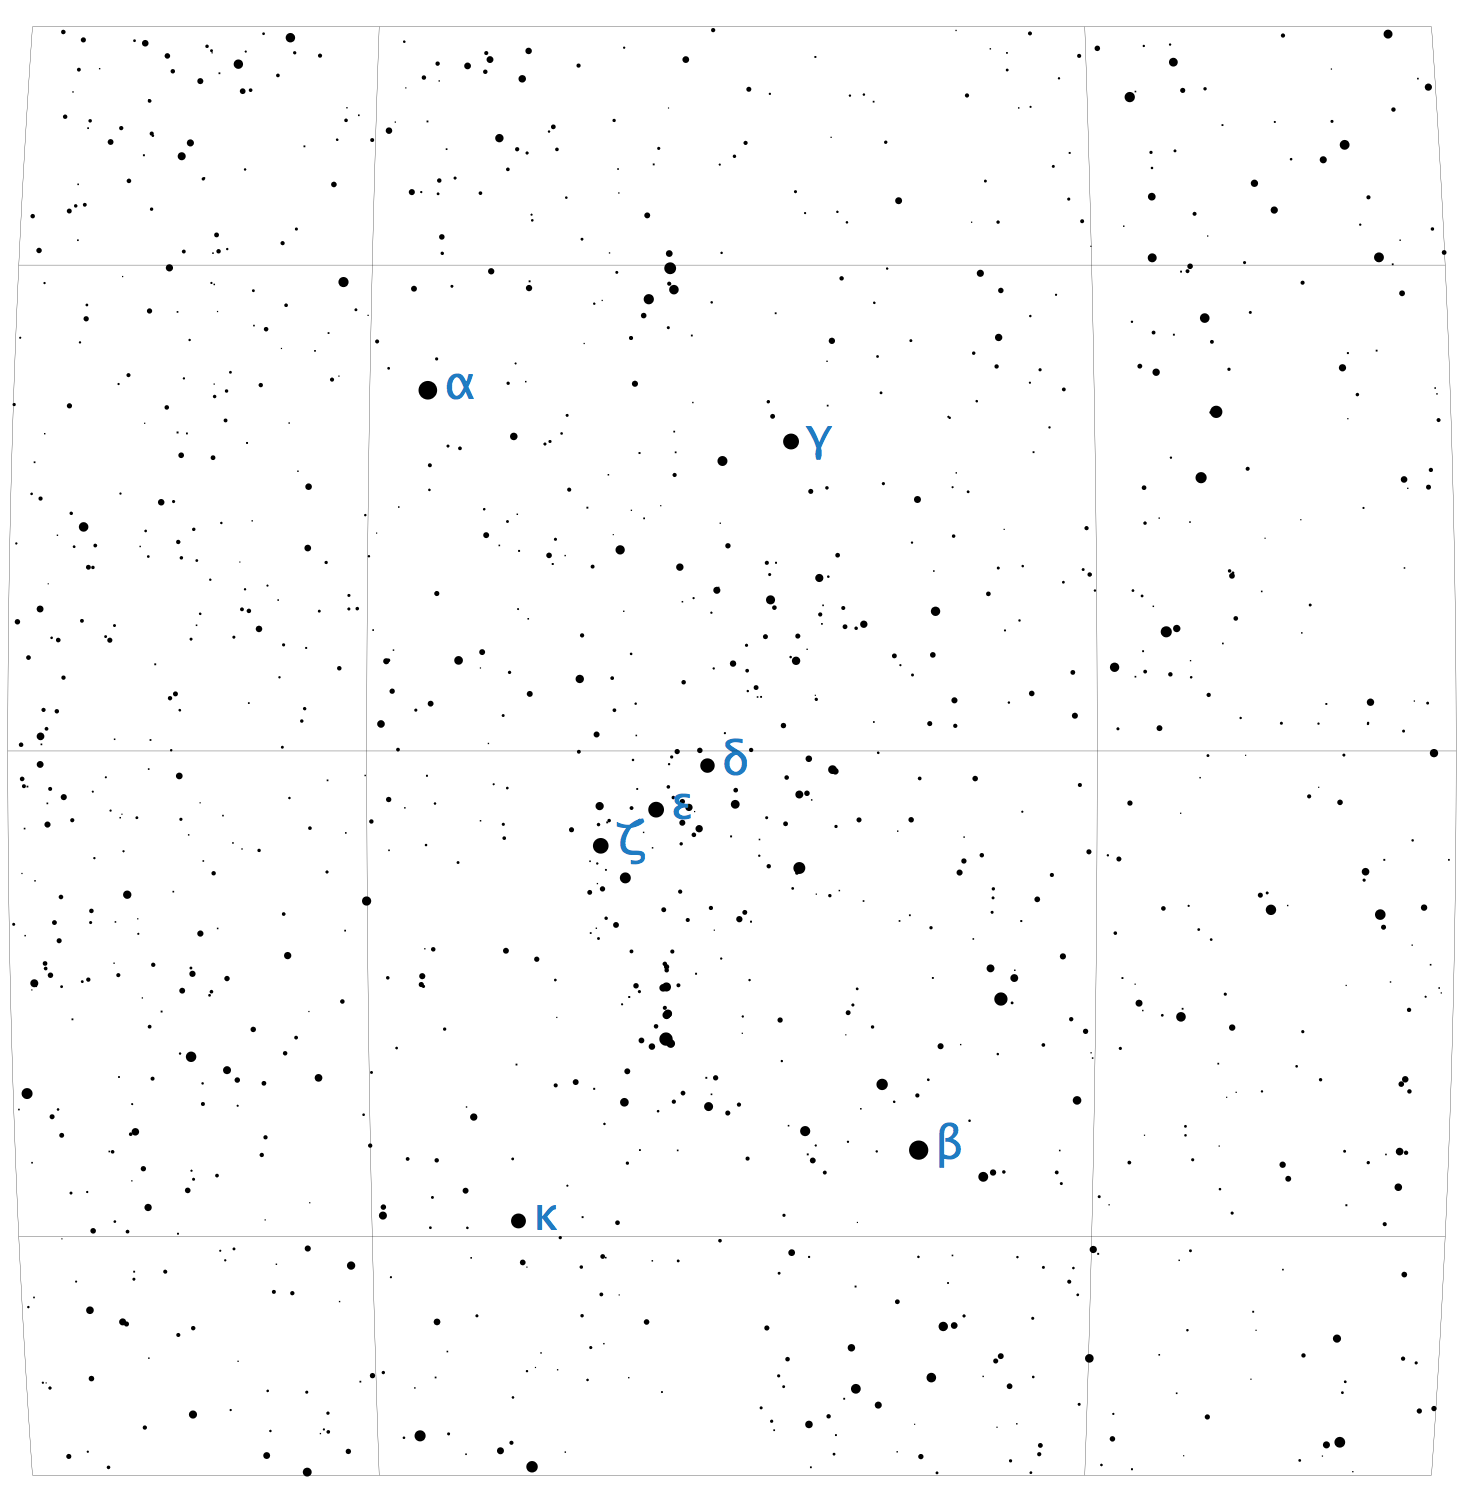 Star Chart showing Orion